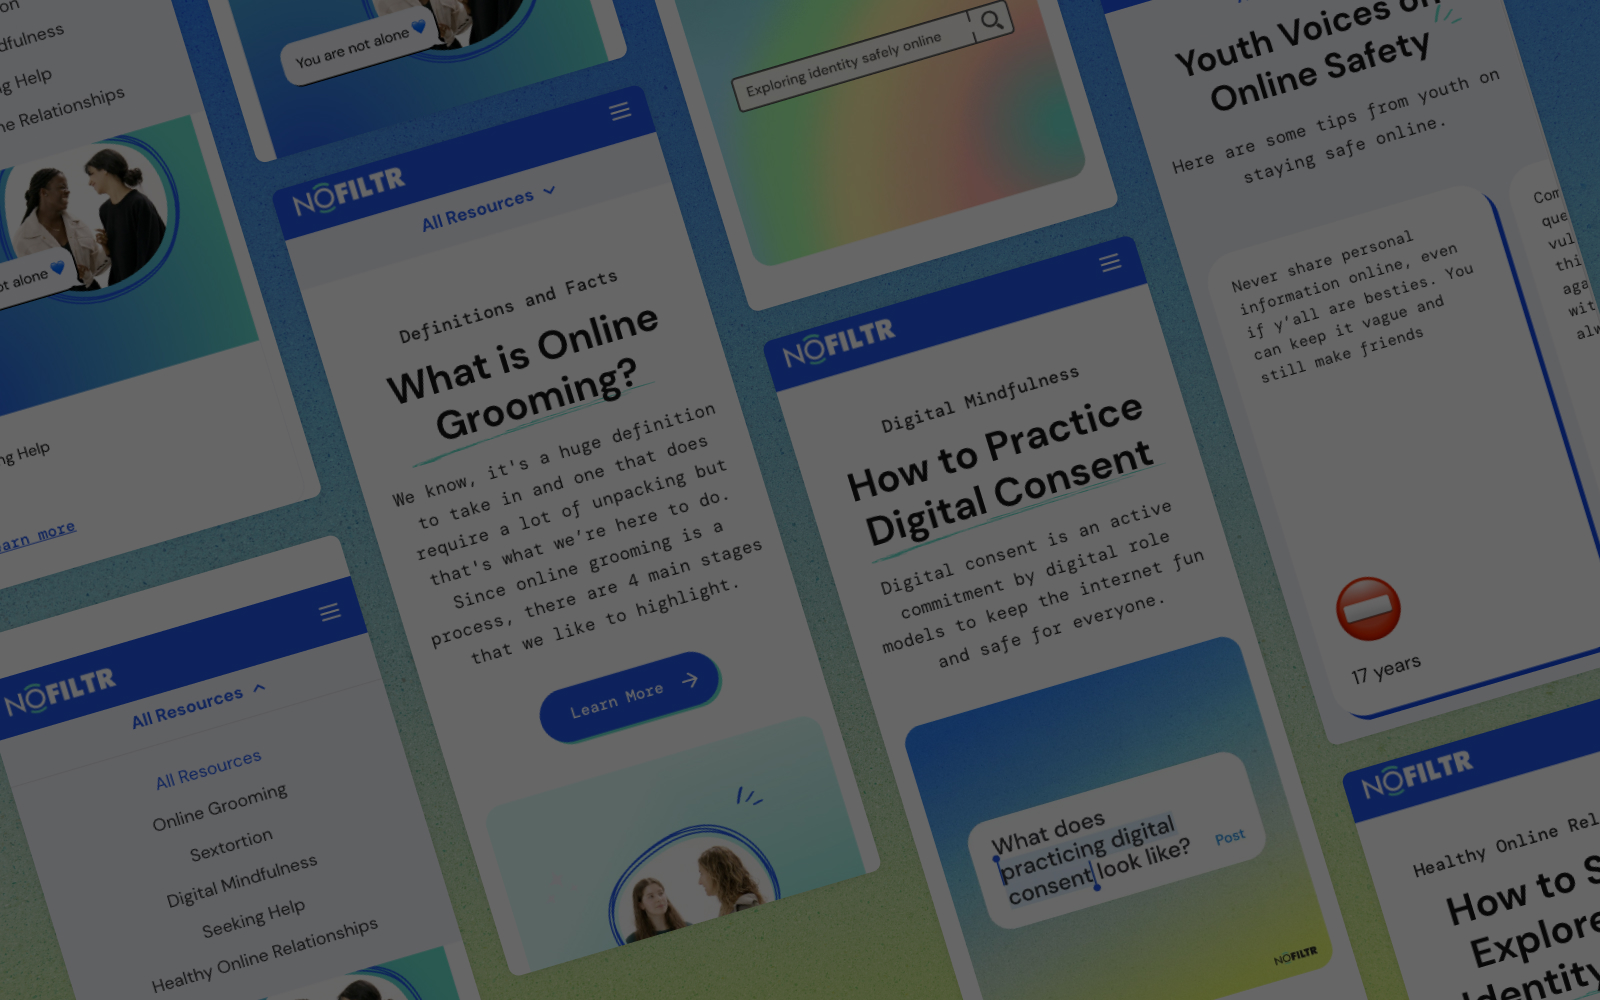 Online Risks Prevention and Intervention Resources for Youth